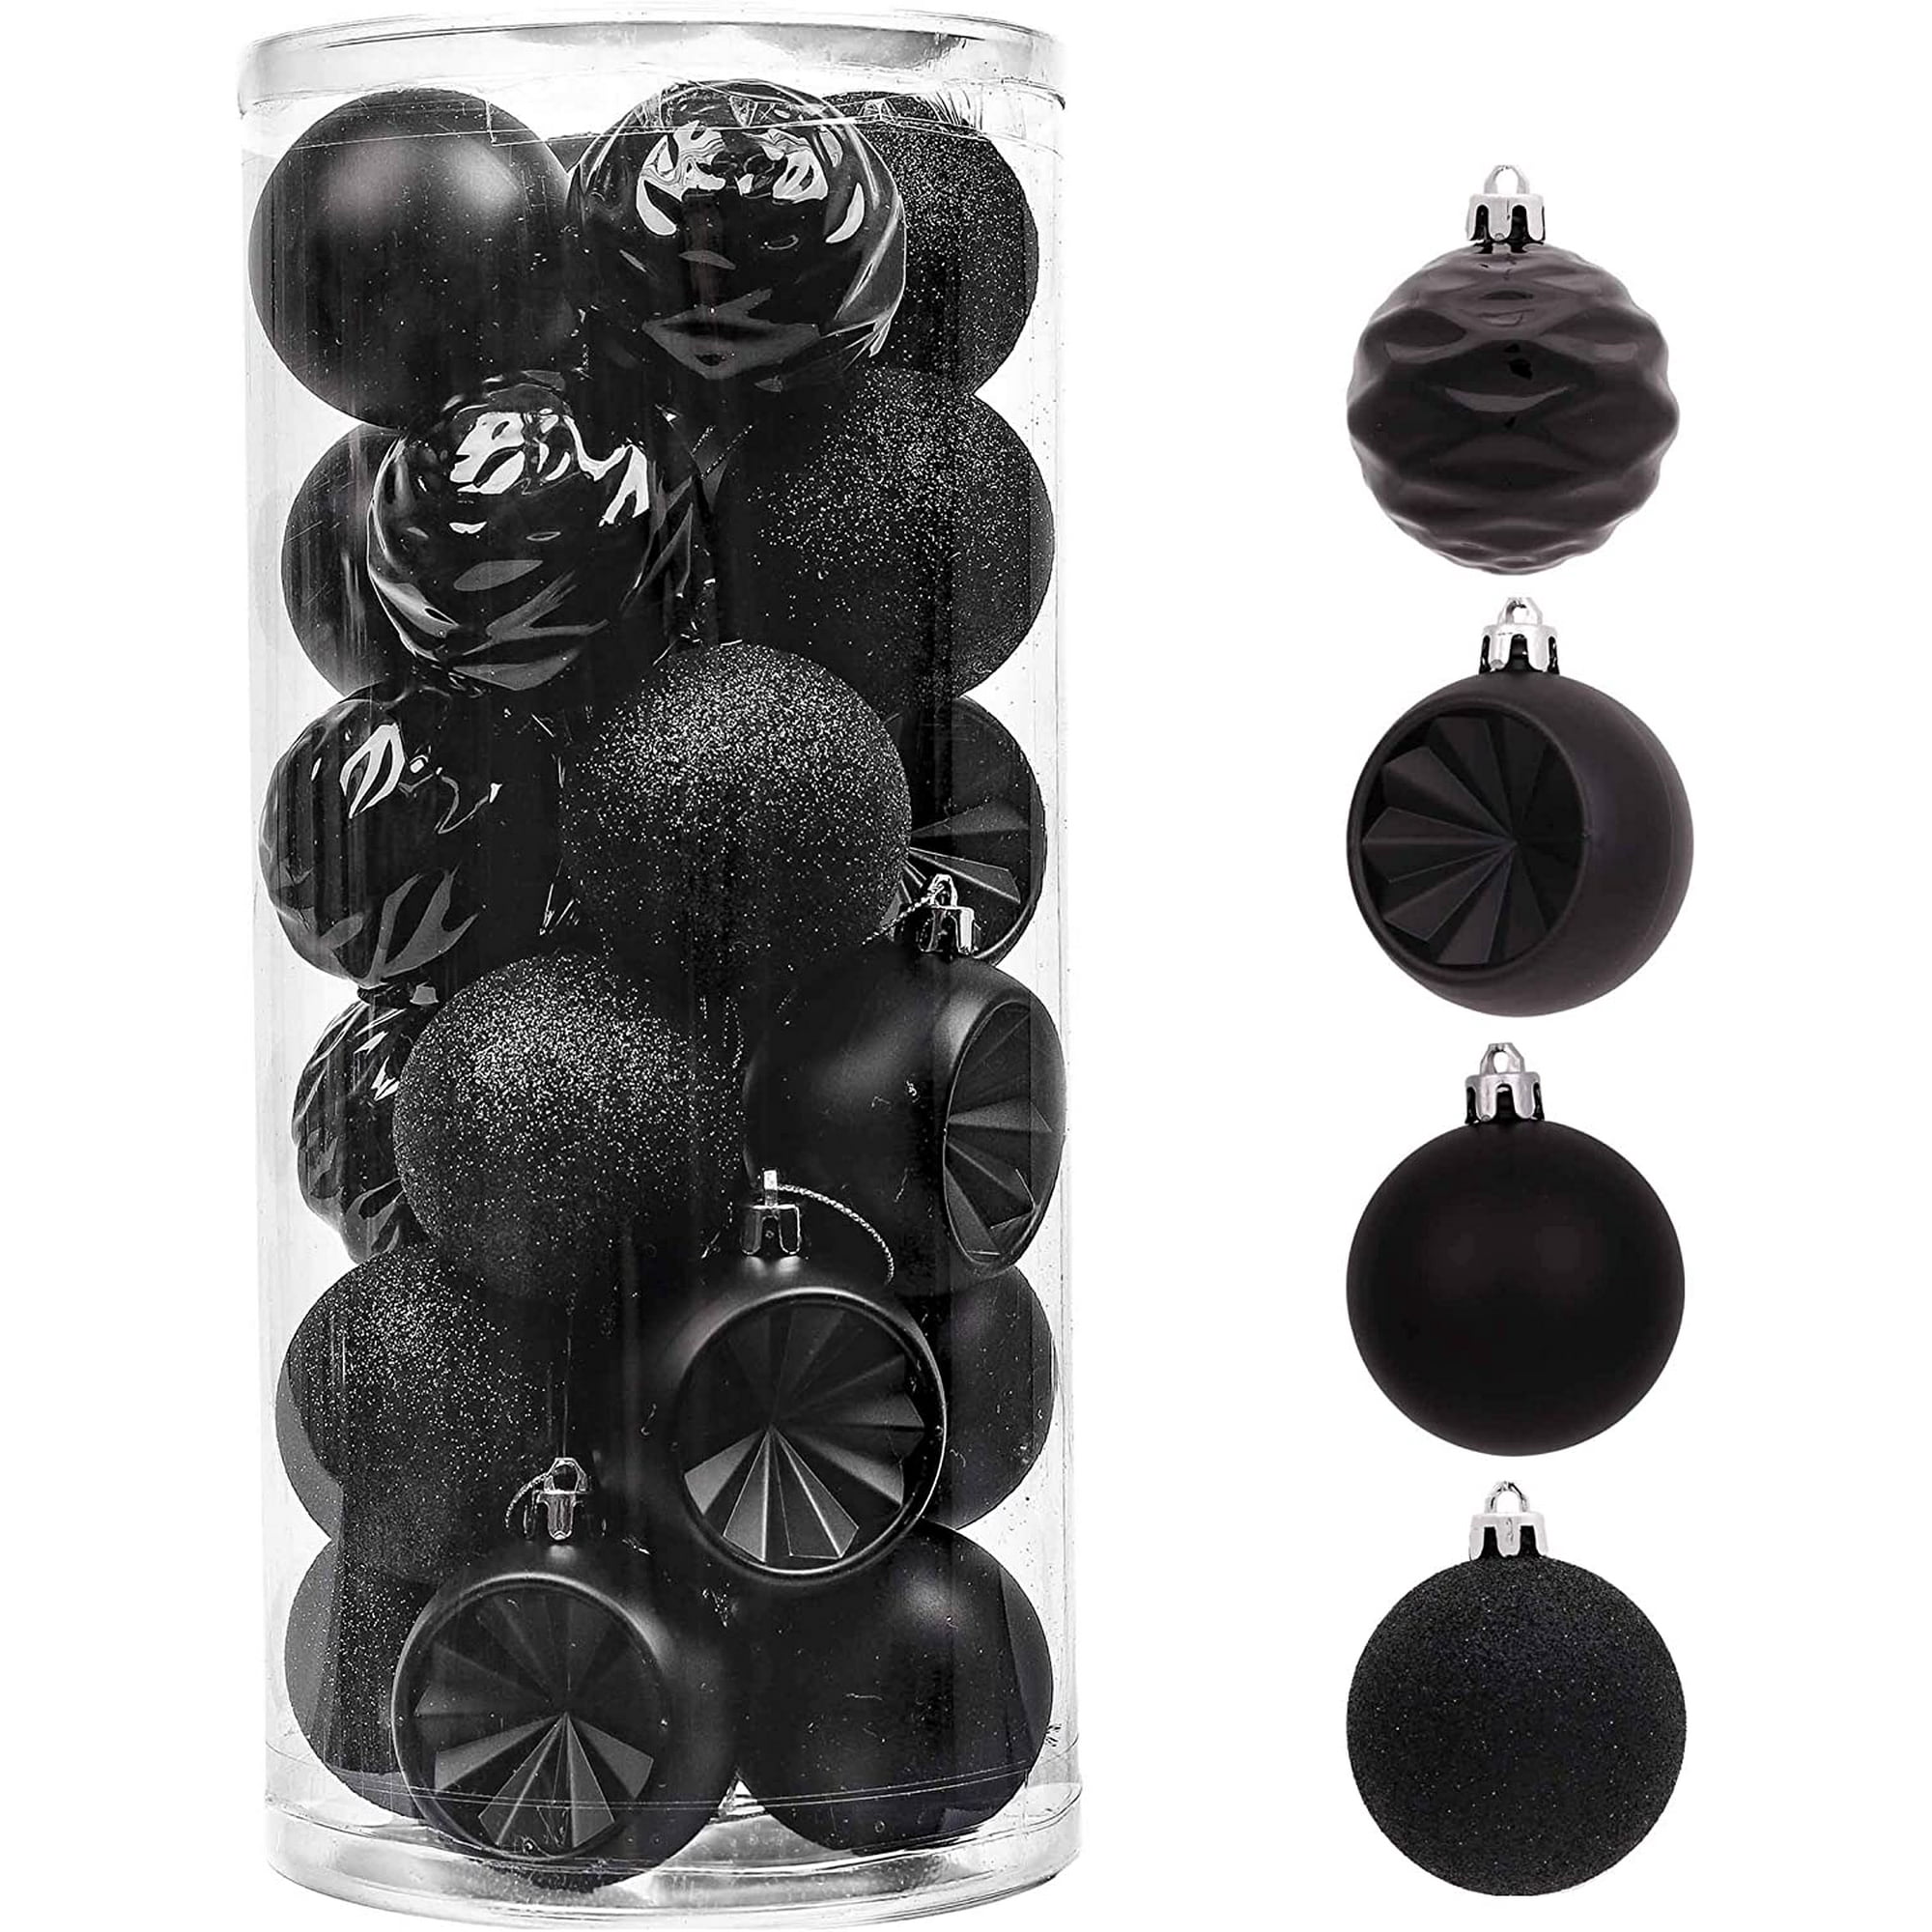 Valery Madelyn 24ct 2.36 inches Black Halloween Ball Ornaments ...